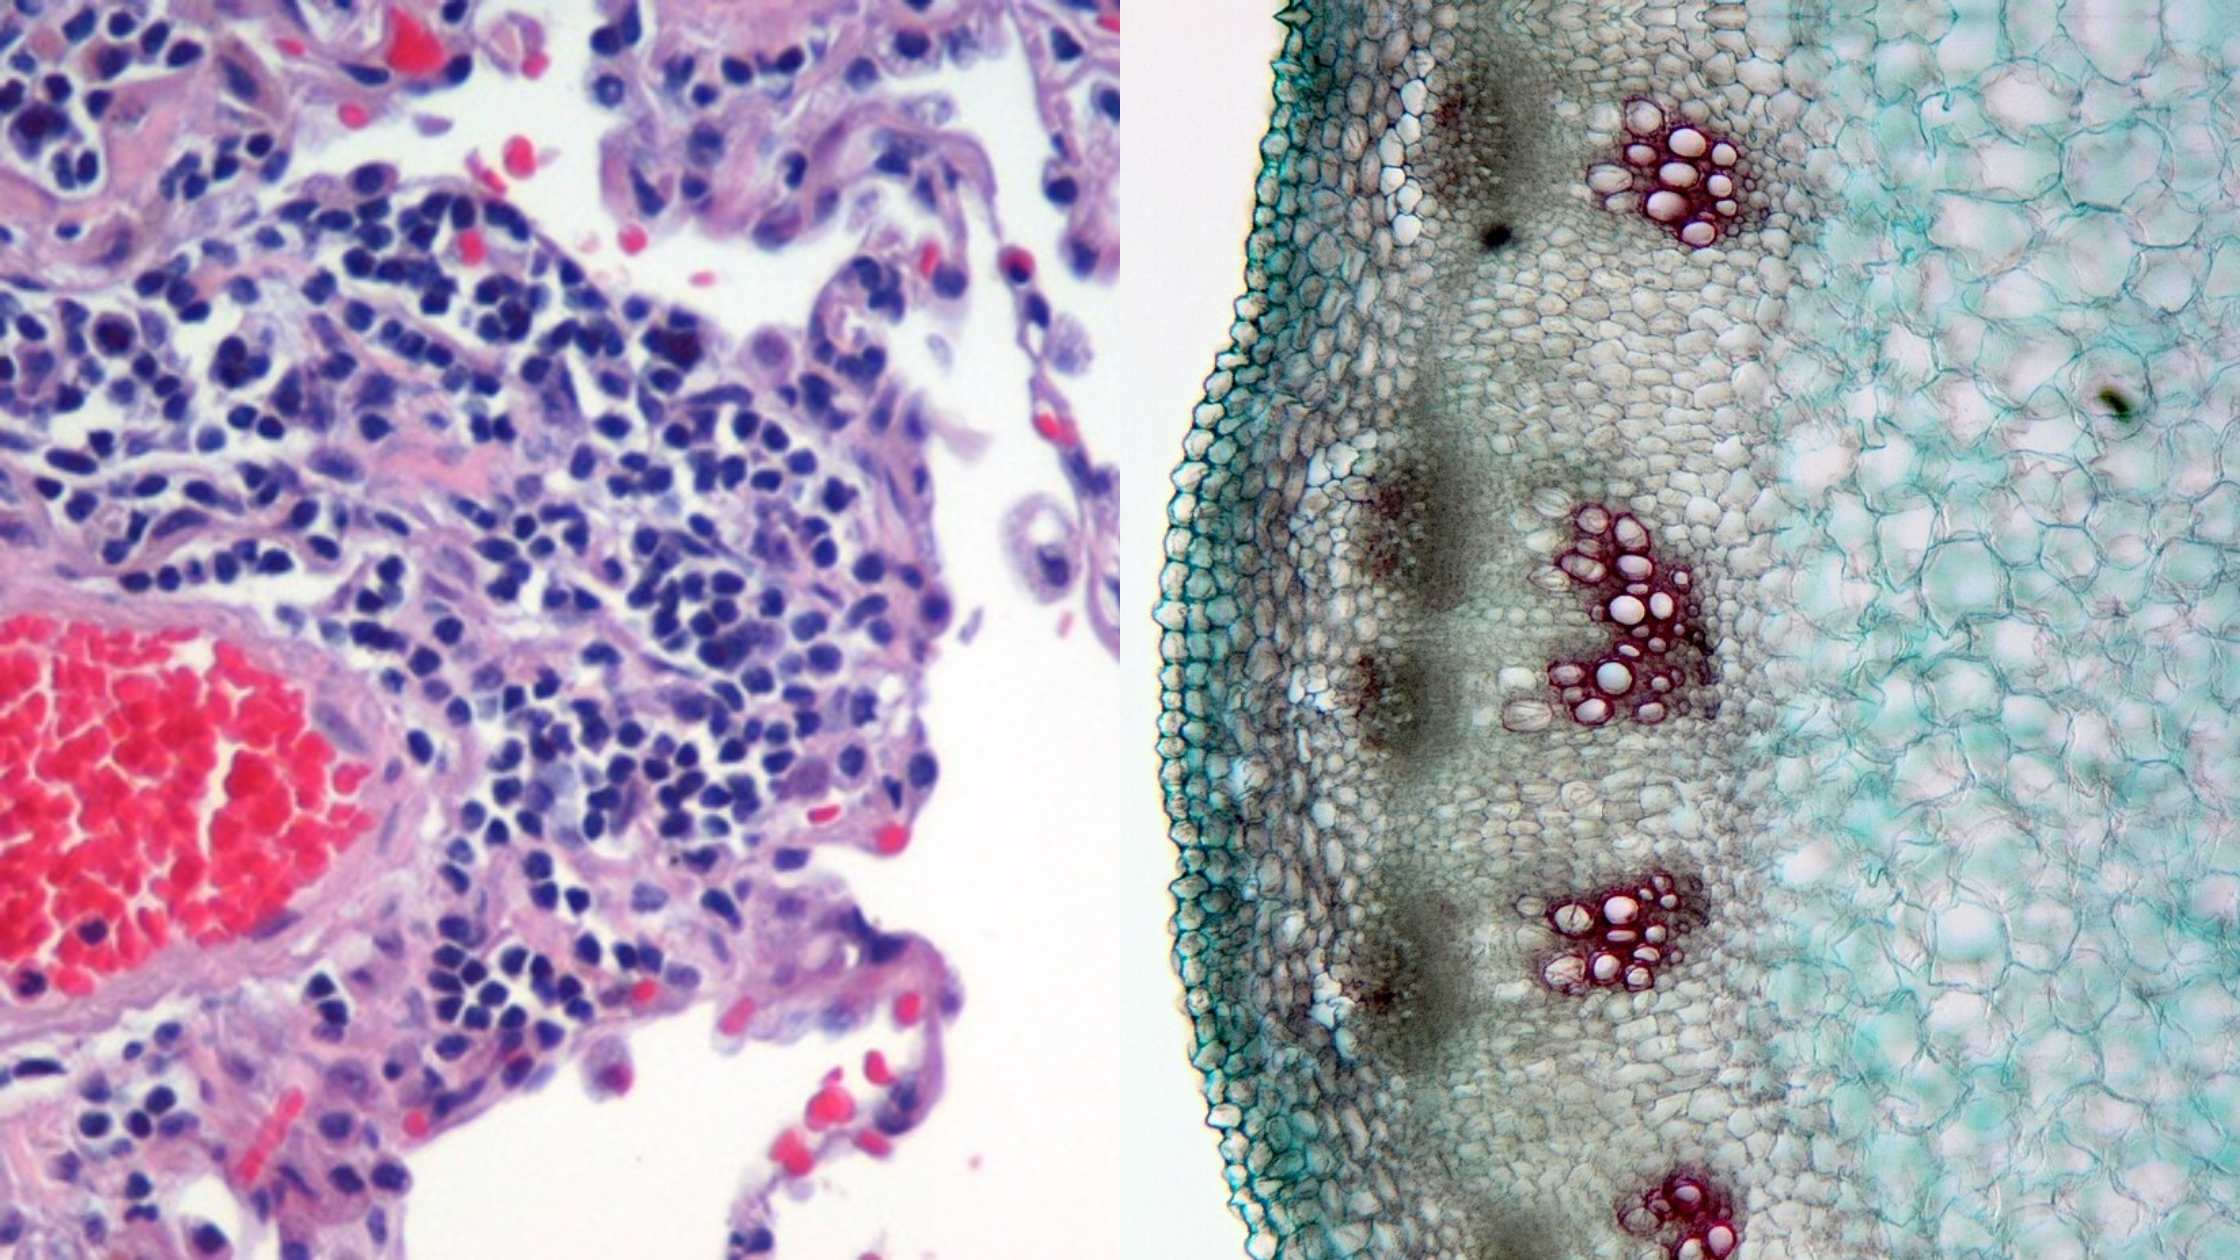 Histology - Definition, Methods, Careers, Importance